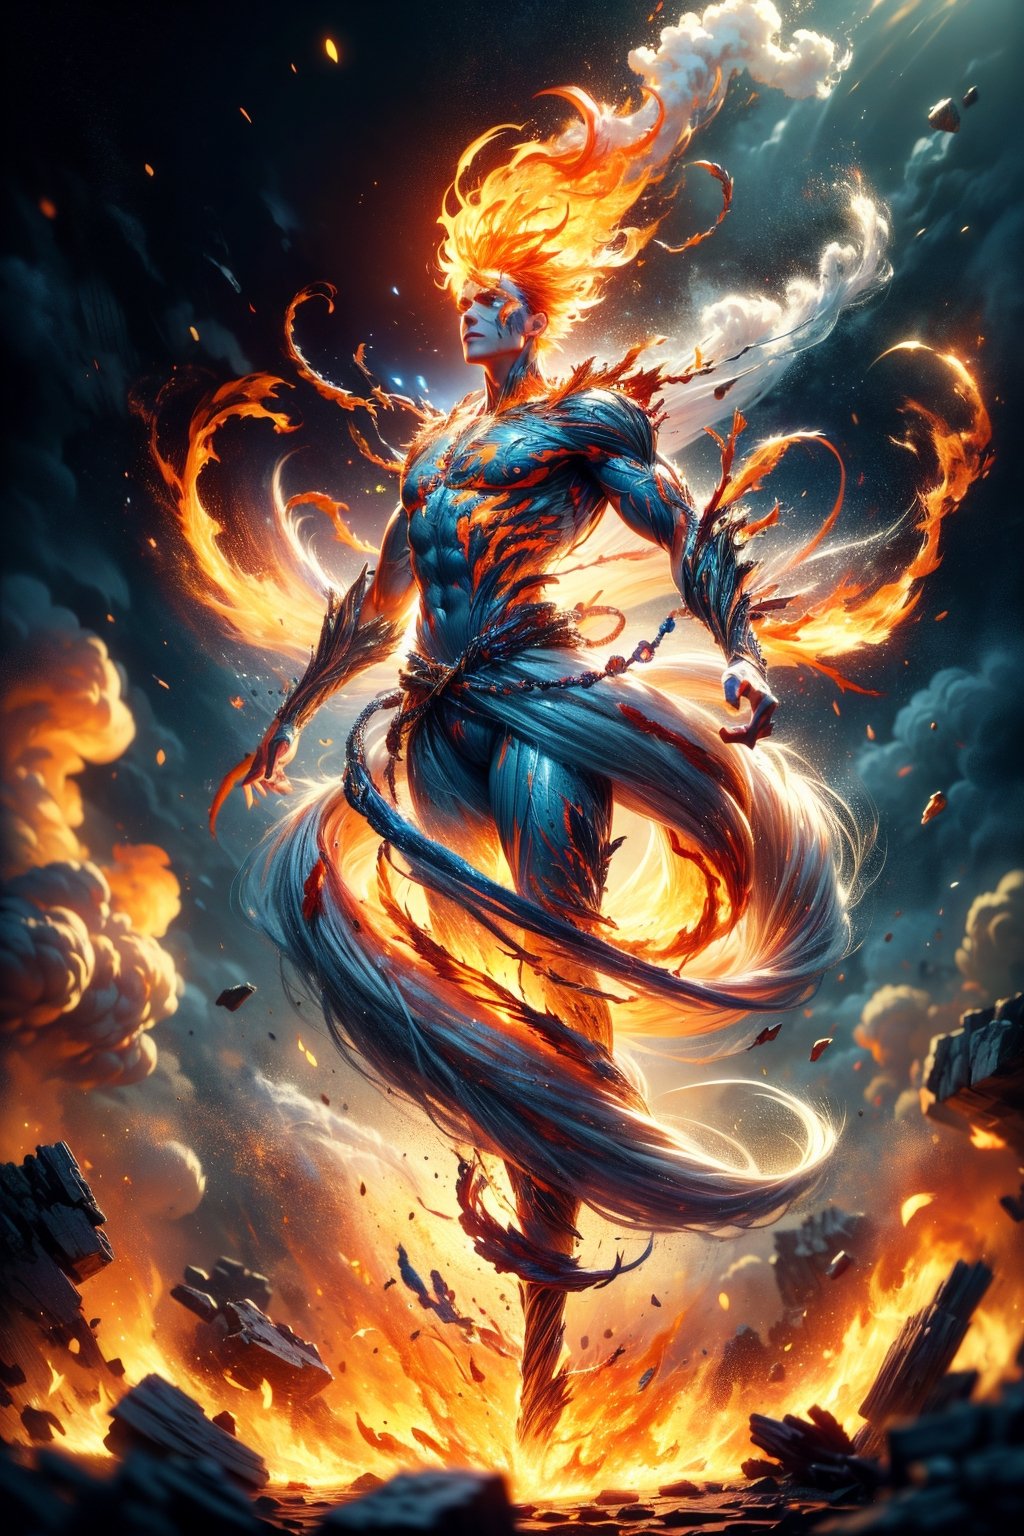 photographic, cinematic, super high detailed, super realistic image, 8k, HDR, super high quality image, master realistic image, perfect, detailed face, solo, (1boy), messy hair, orange hair, melancholy eyes, wore a red colored robe with glowing totemic embroidery, tribal tattoos, flame pentagram necklace, refined muscular body, tall, vibrant, detailed character design, reminiscent of fighting video games, full body shot, capturing the essence of ancient and immortality, dynamic, tiny maritime floating DonM3l3m3nt4l, smoke,